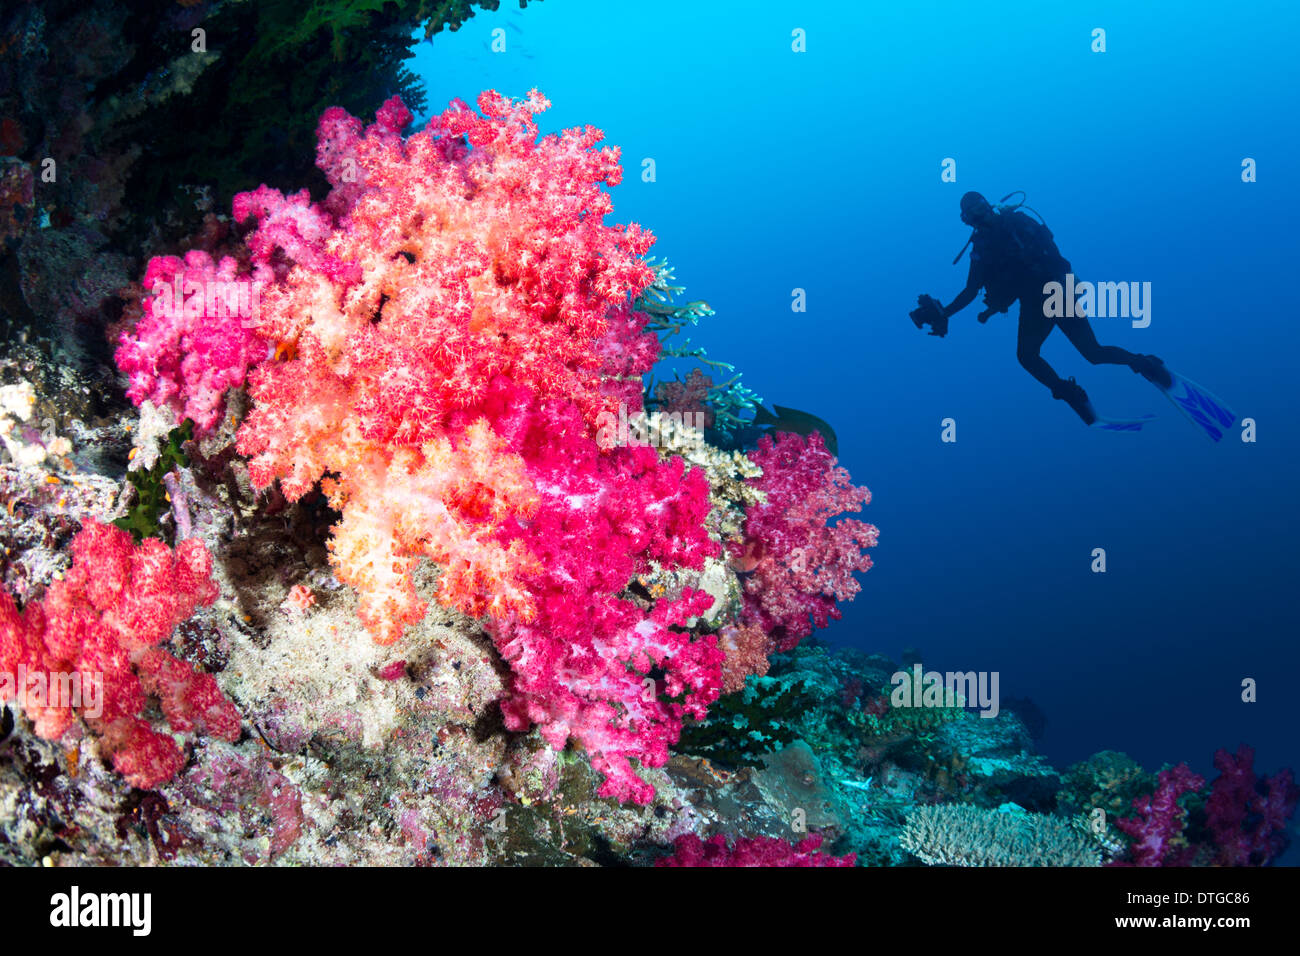 Scuba diver swims by a beautiful tropical reef full of vibrant purple and orange soft corals. Stock Photo